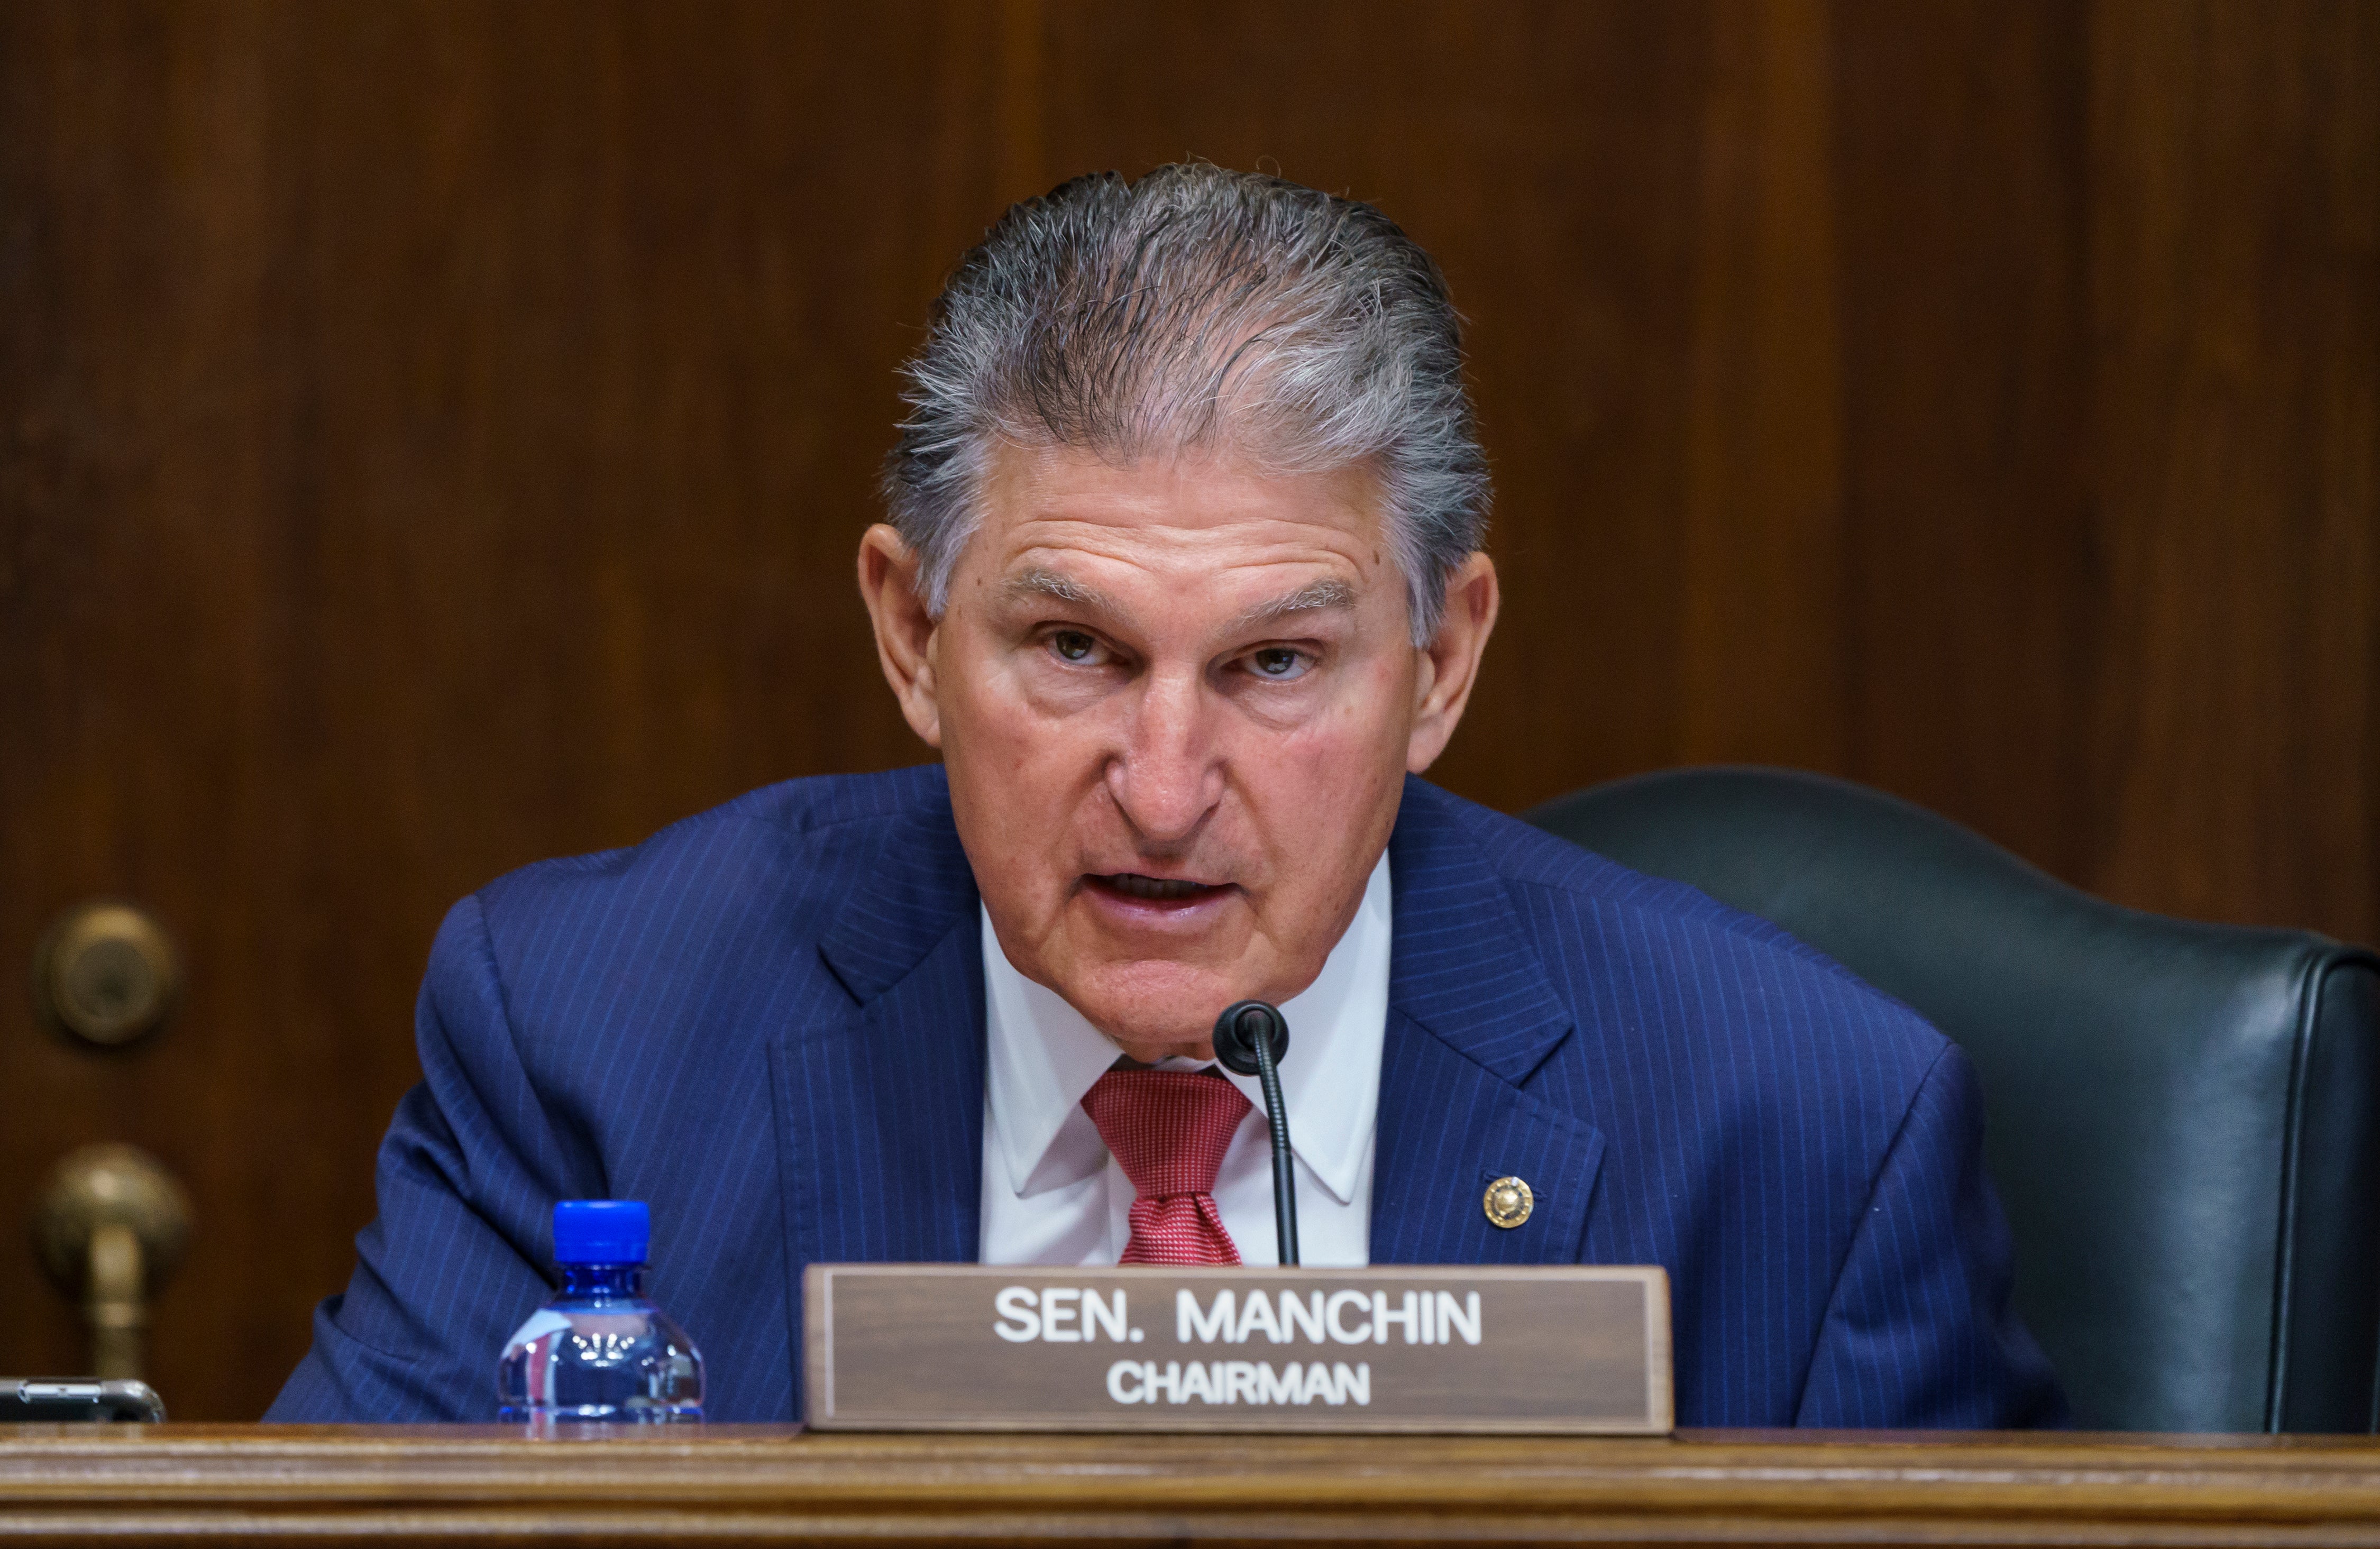 Senator Joe Manchin, a centrist Democrat, said he was ‘very disappointed’ with the vote